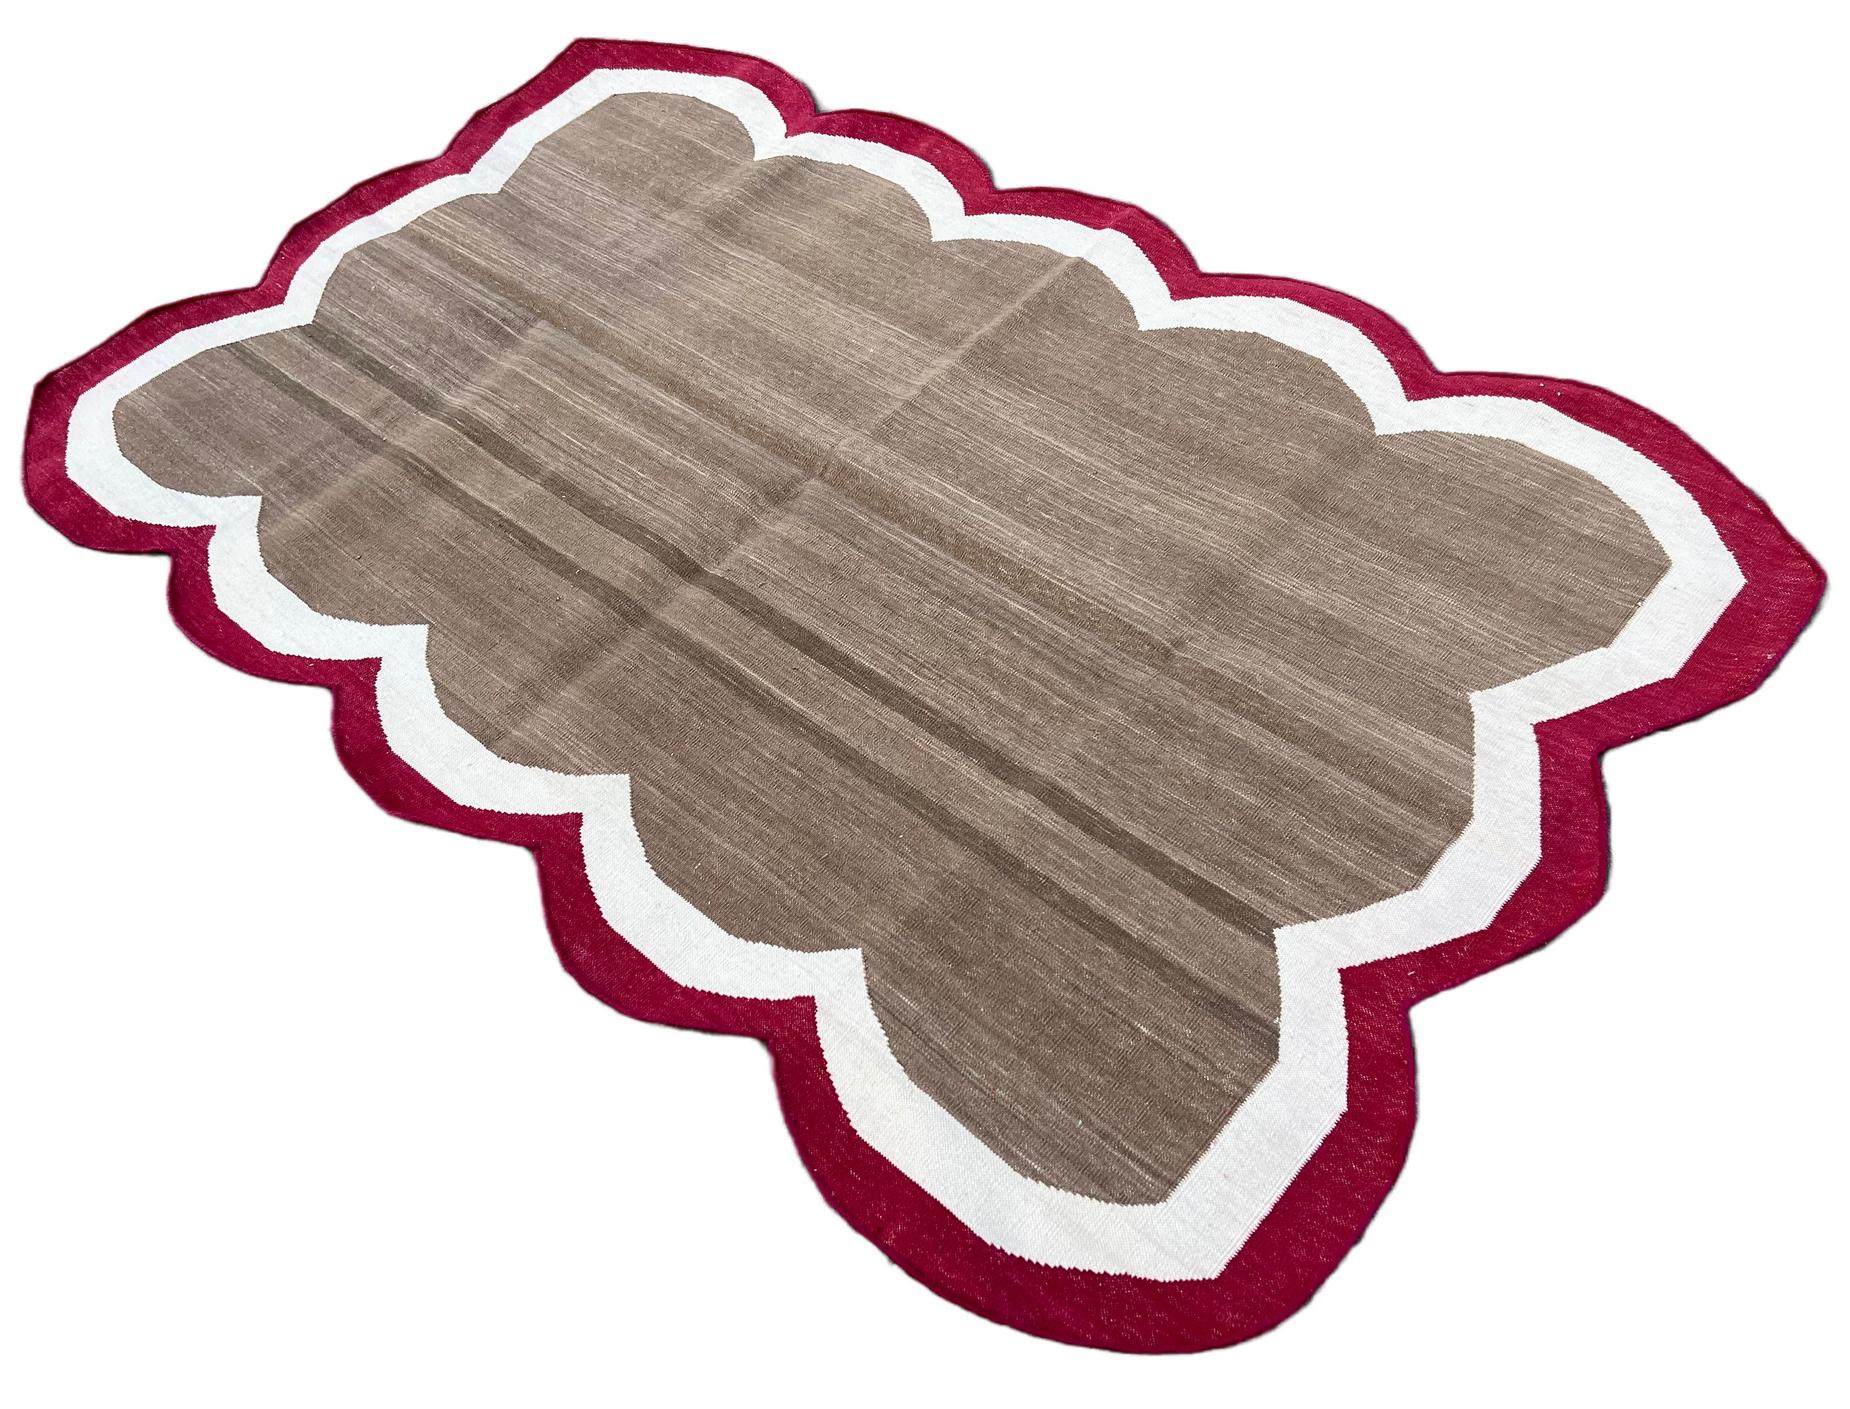 Cotton Vegetable Dyed Brown, Cream And Red Four Sided Scalloped Rug-3'x5' 
(Scallops runs on all Four Sides)
These special flat-weave dhurries are hand-woven with 15 ply 100% cotton yarn. Due to the special manufacturing techniques used to create